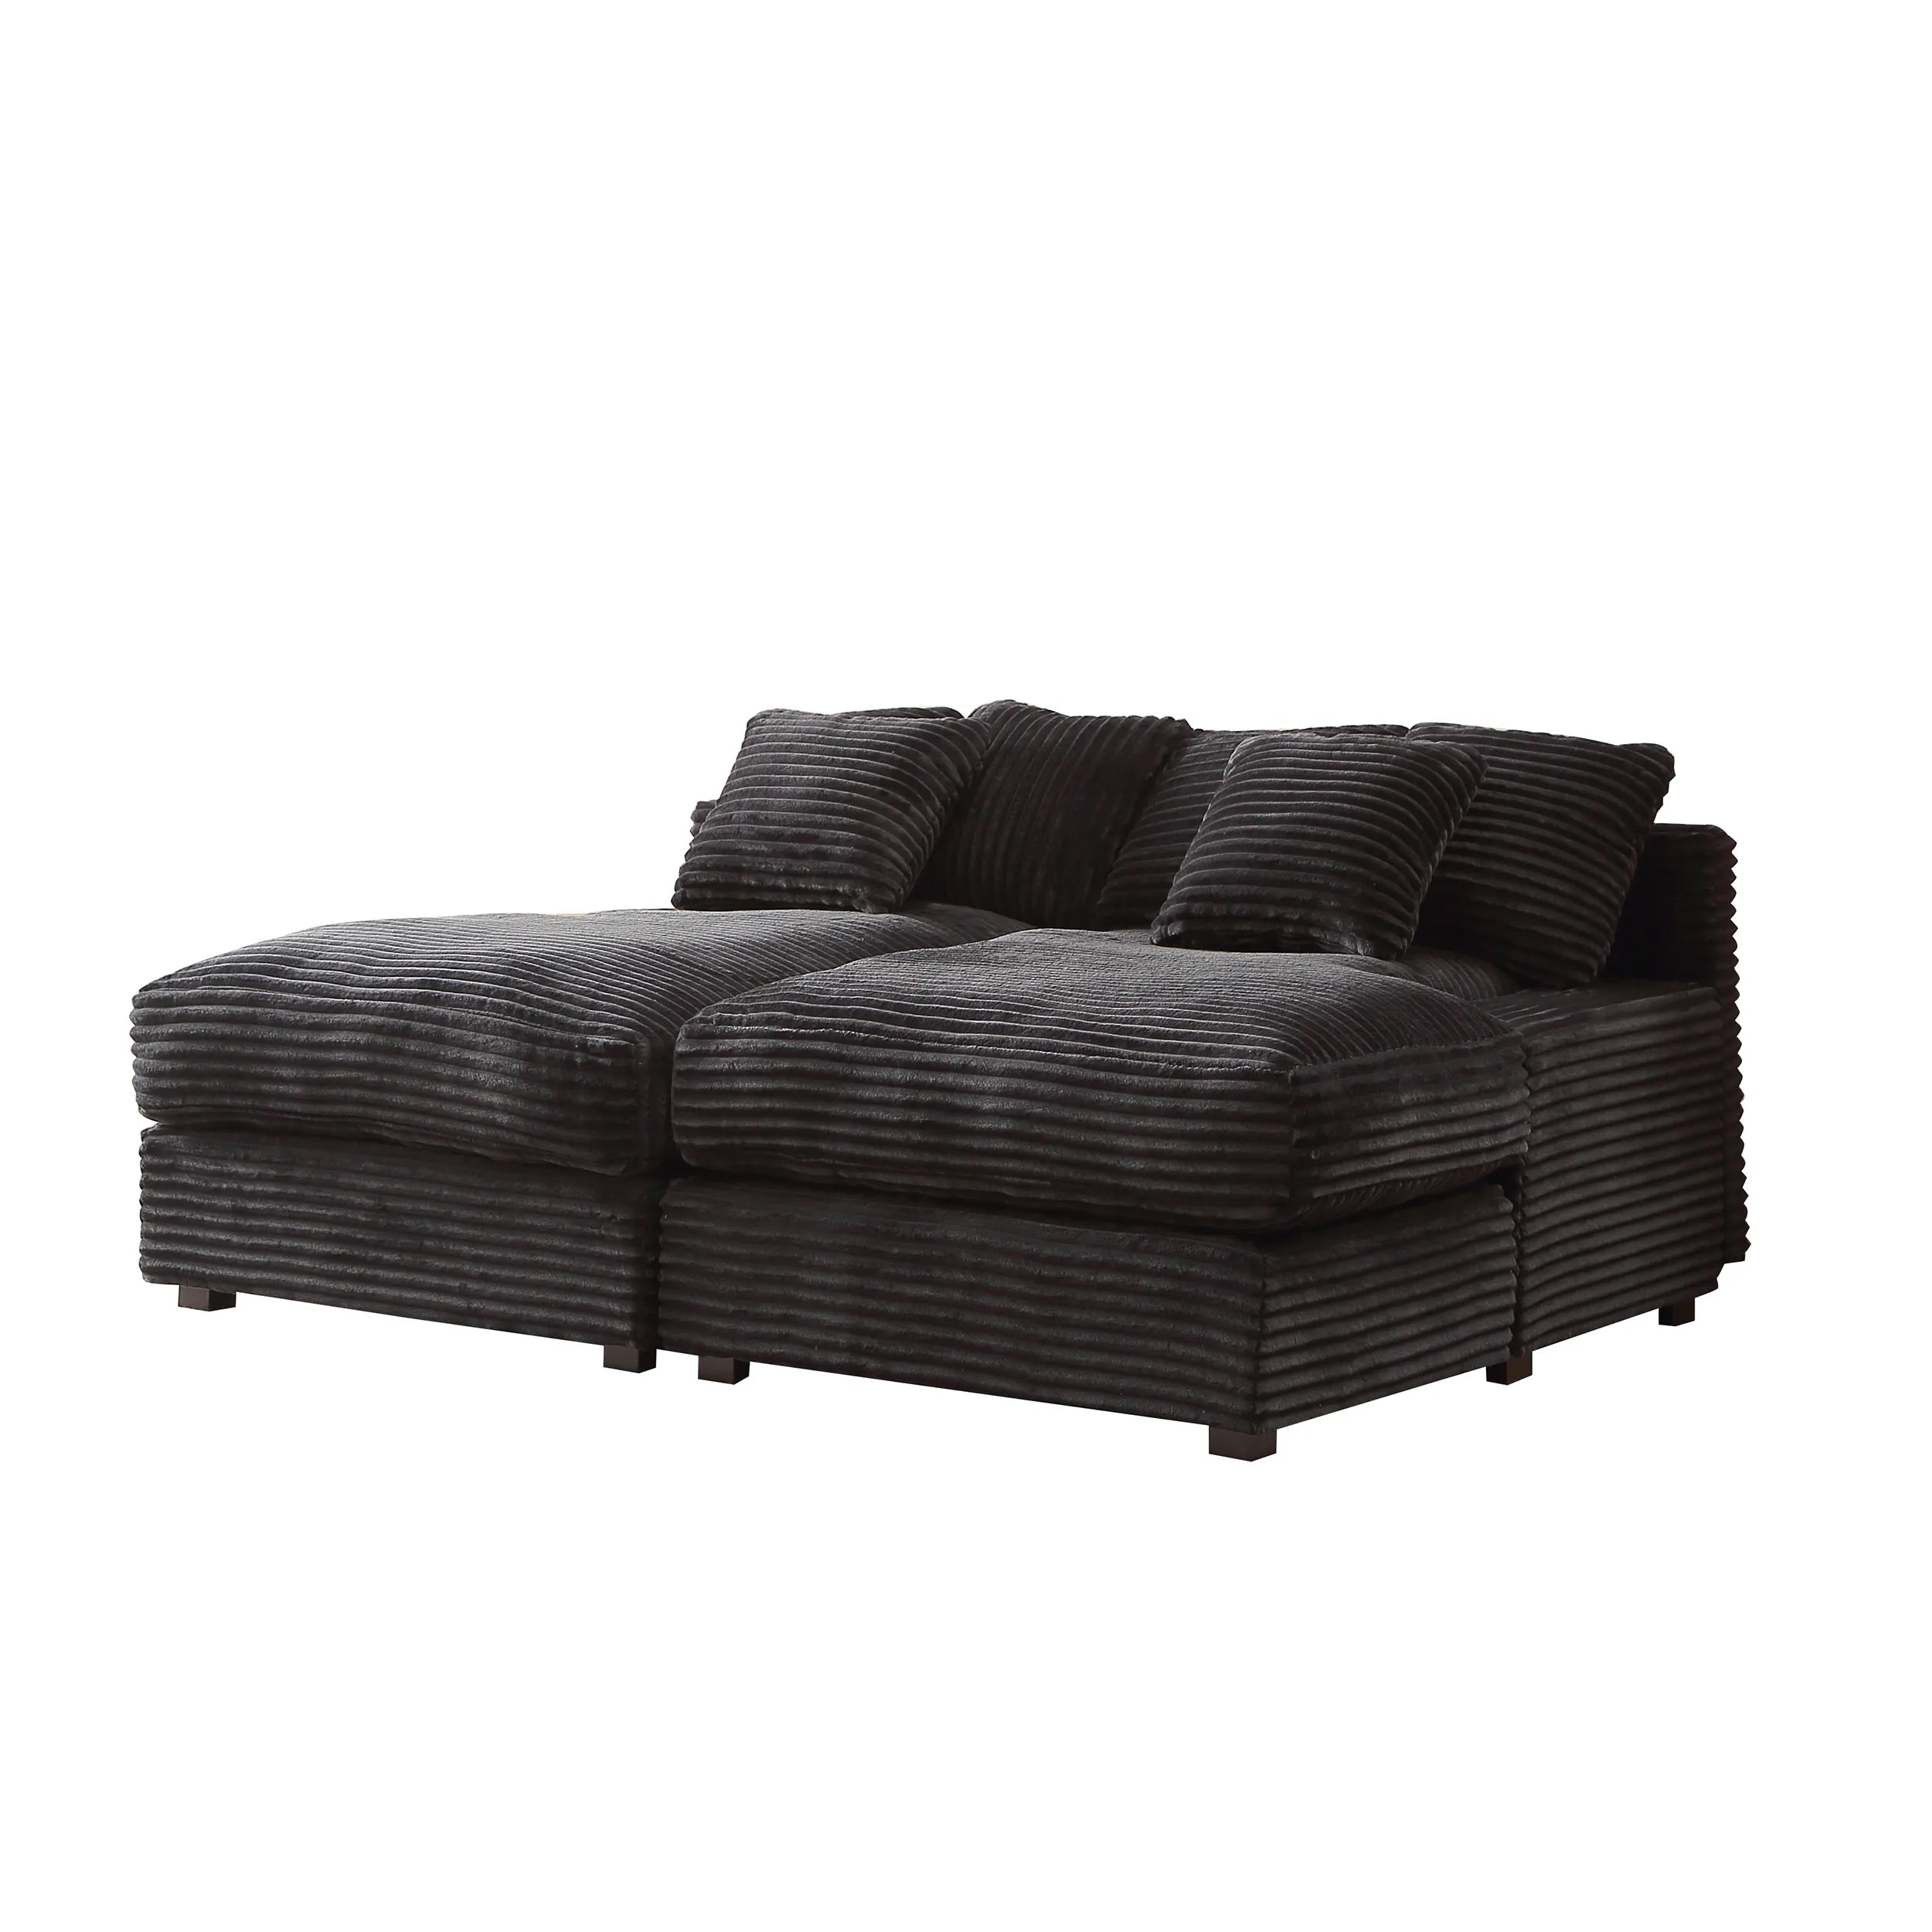 Louie Corduroy Sectional Sofa, Deep Seat Double Chaise Couch - Black